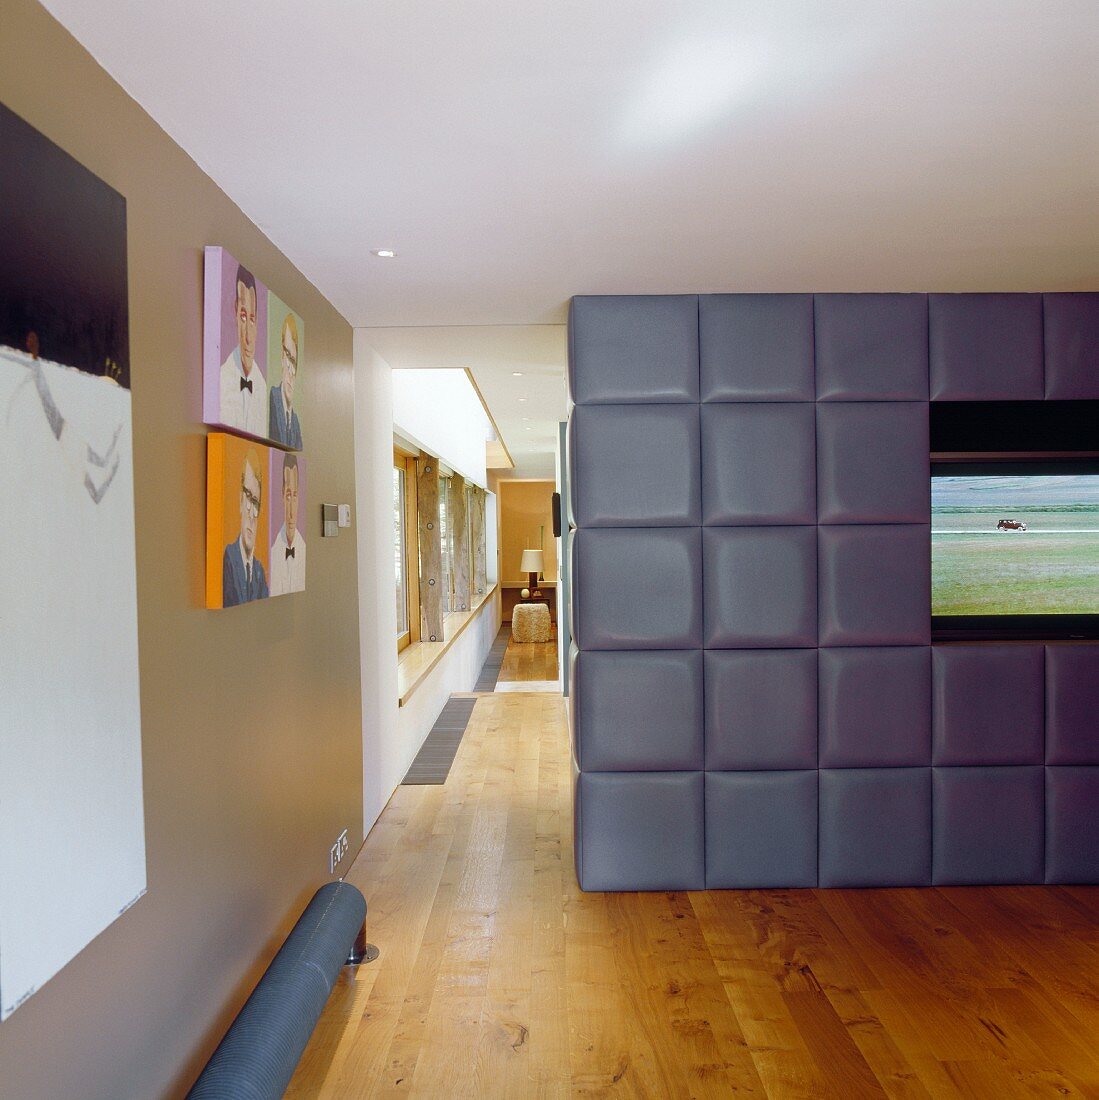 A television built into an upholstered partition wall with a view down a long corridor